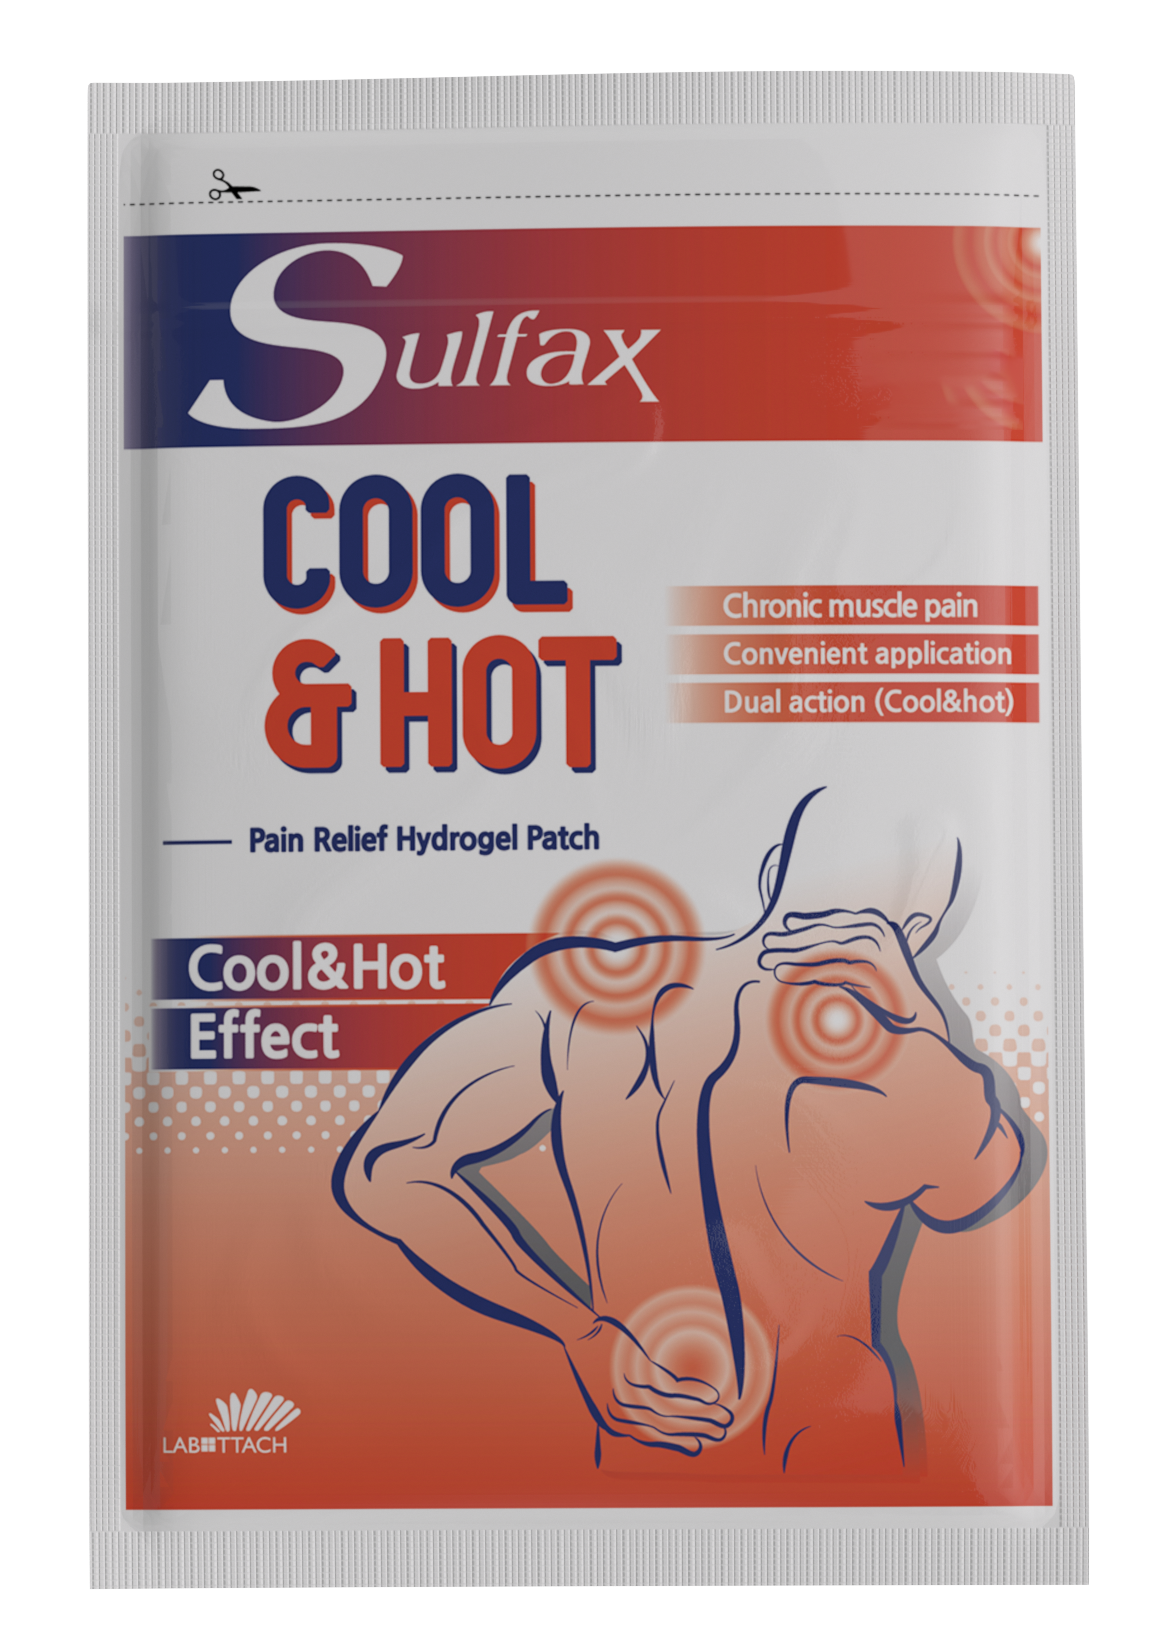 Sulfax Cool & Hot patches